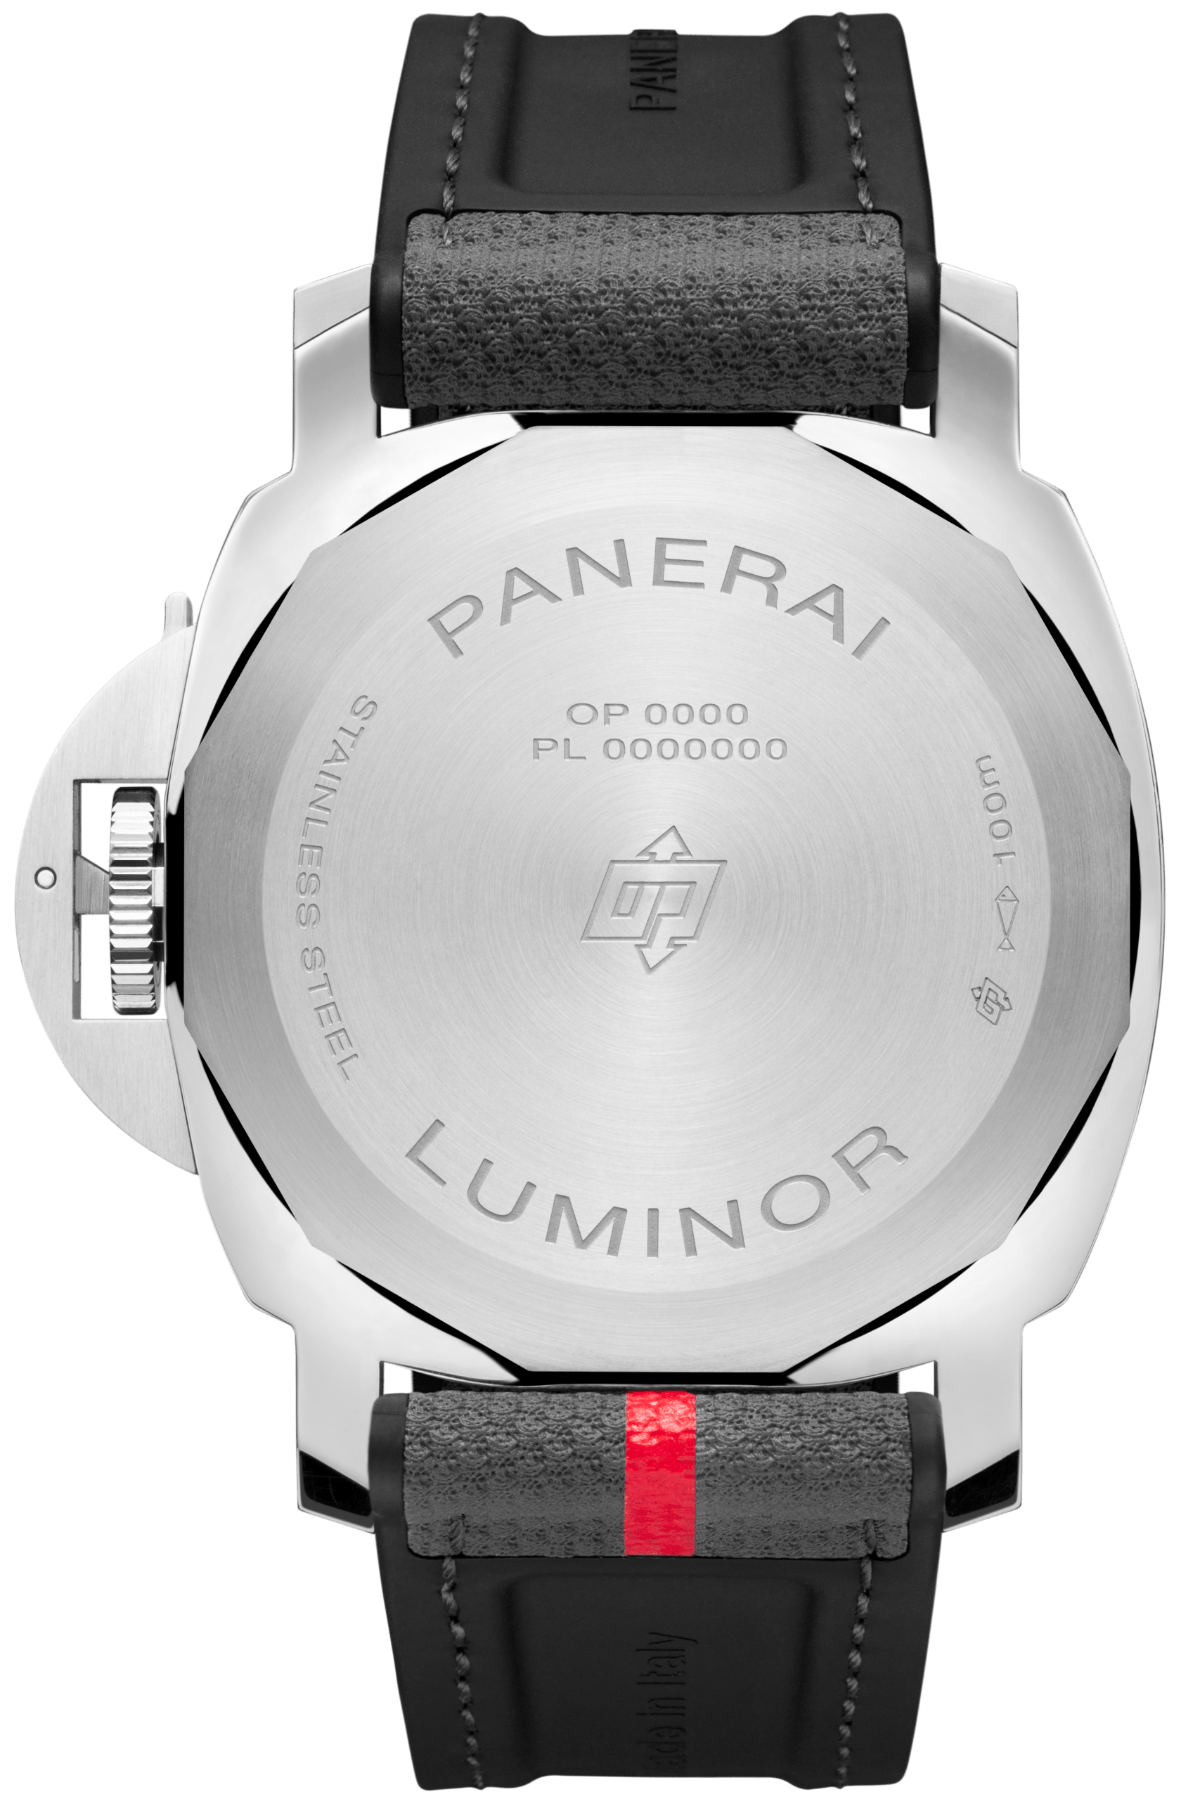 Panerai's Luminor Luna Rossa Watch: Collection Debuts A New Look